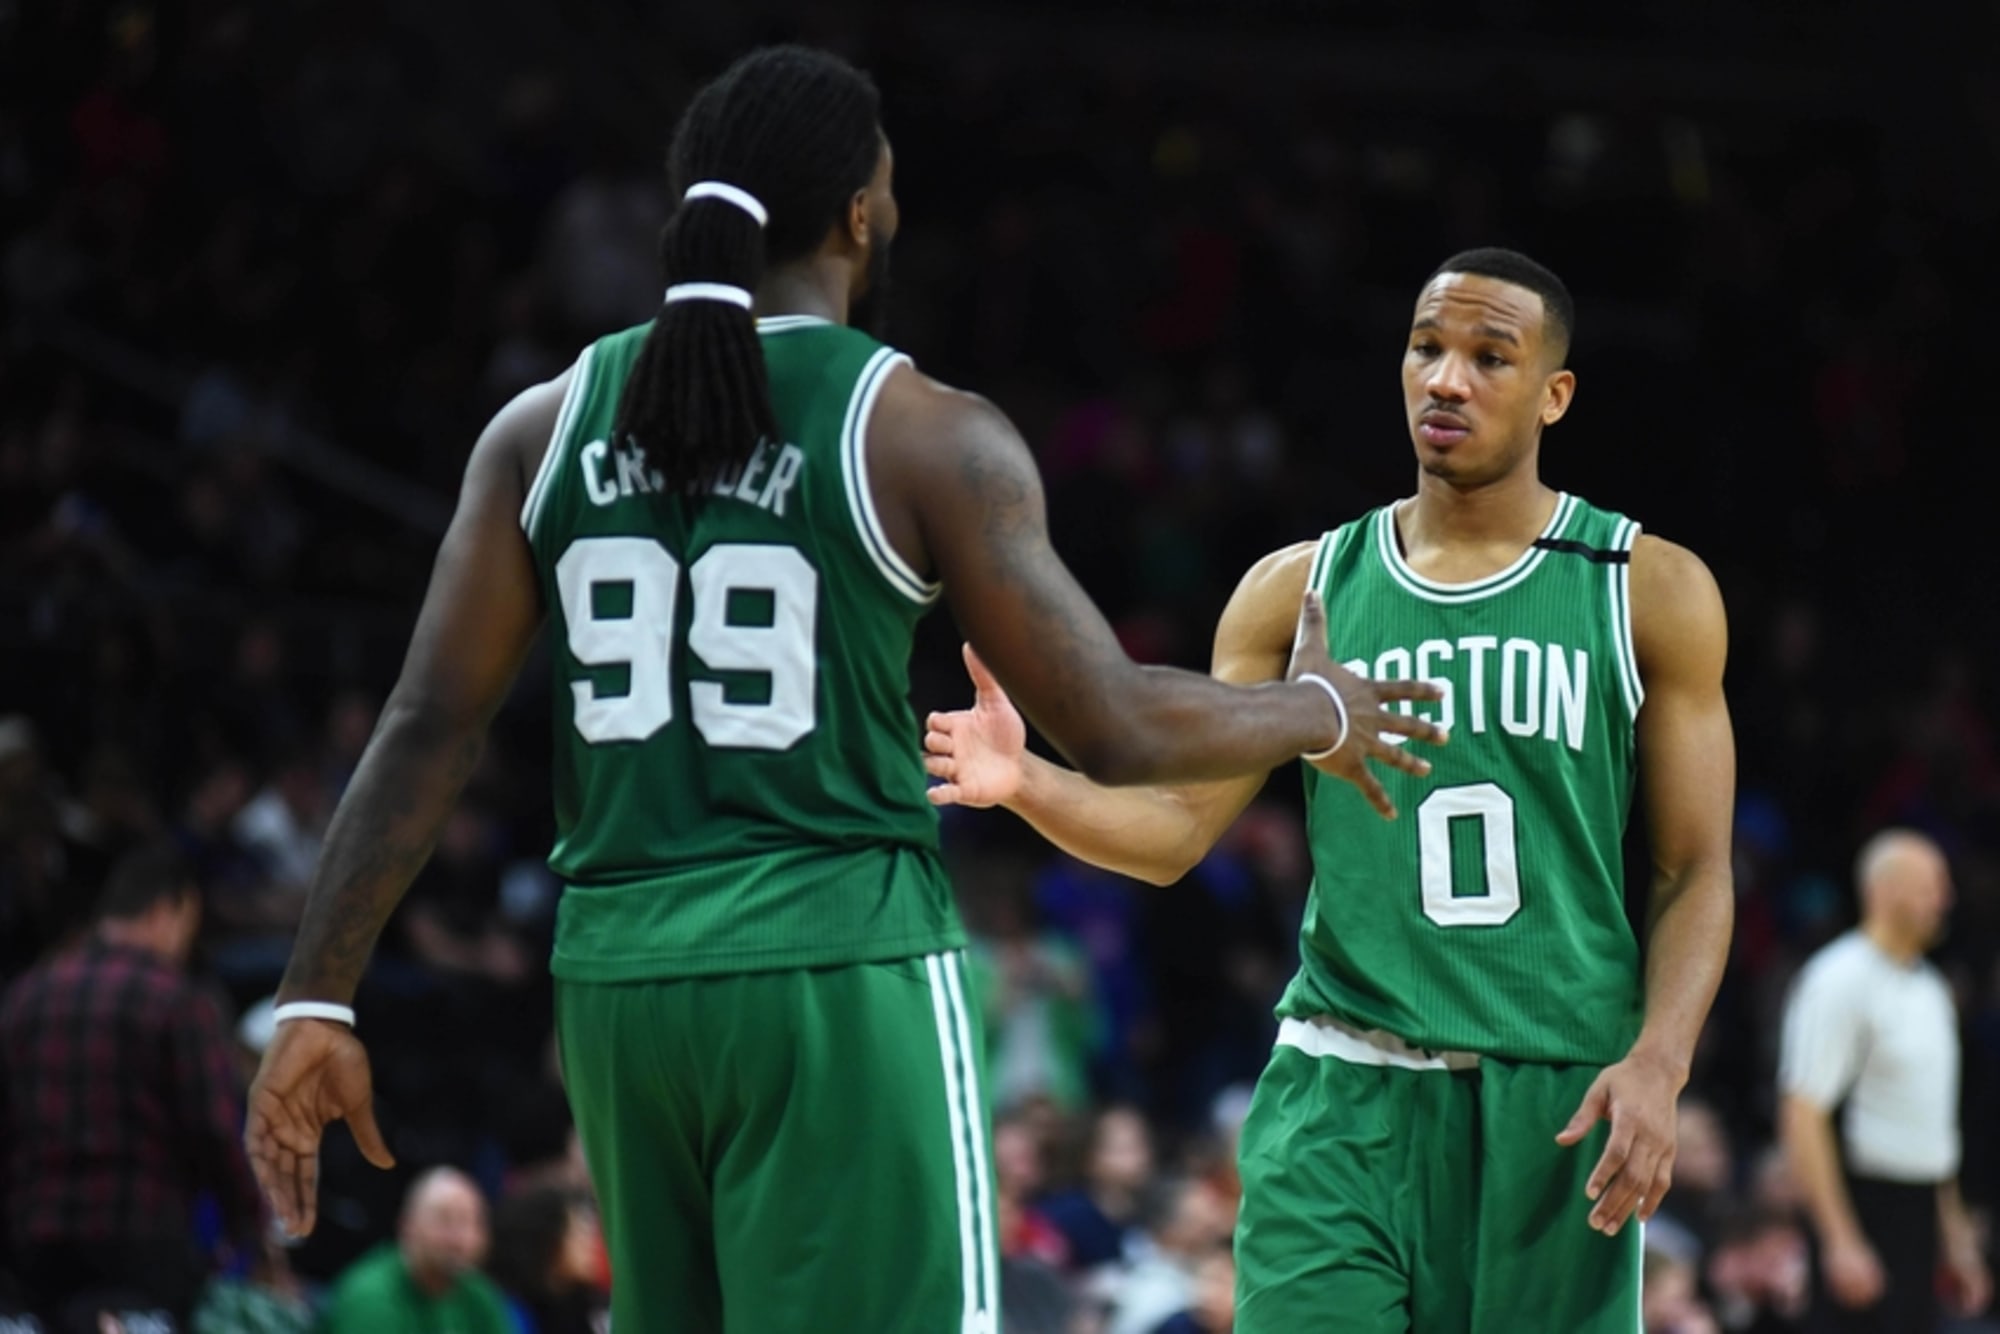 Avery Bradley wants to show he's 'the best perimeter defender in